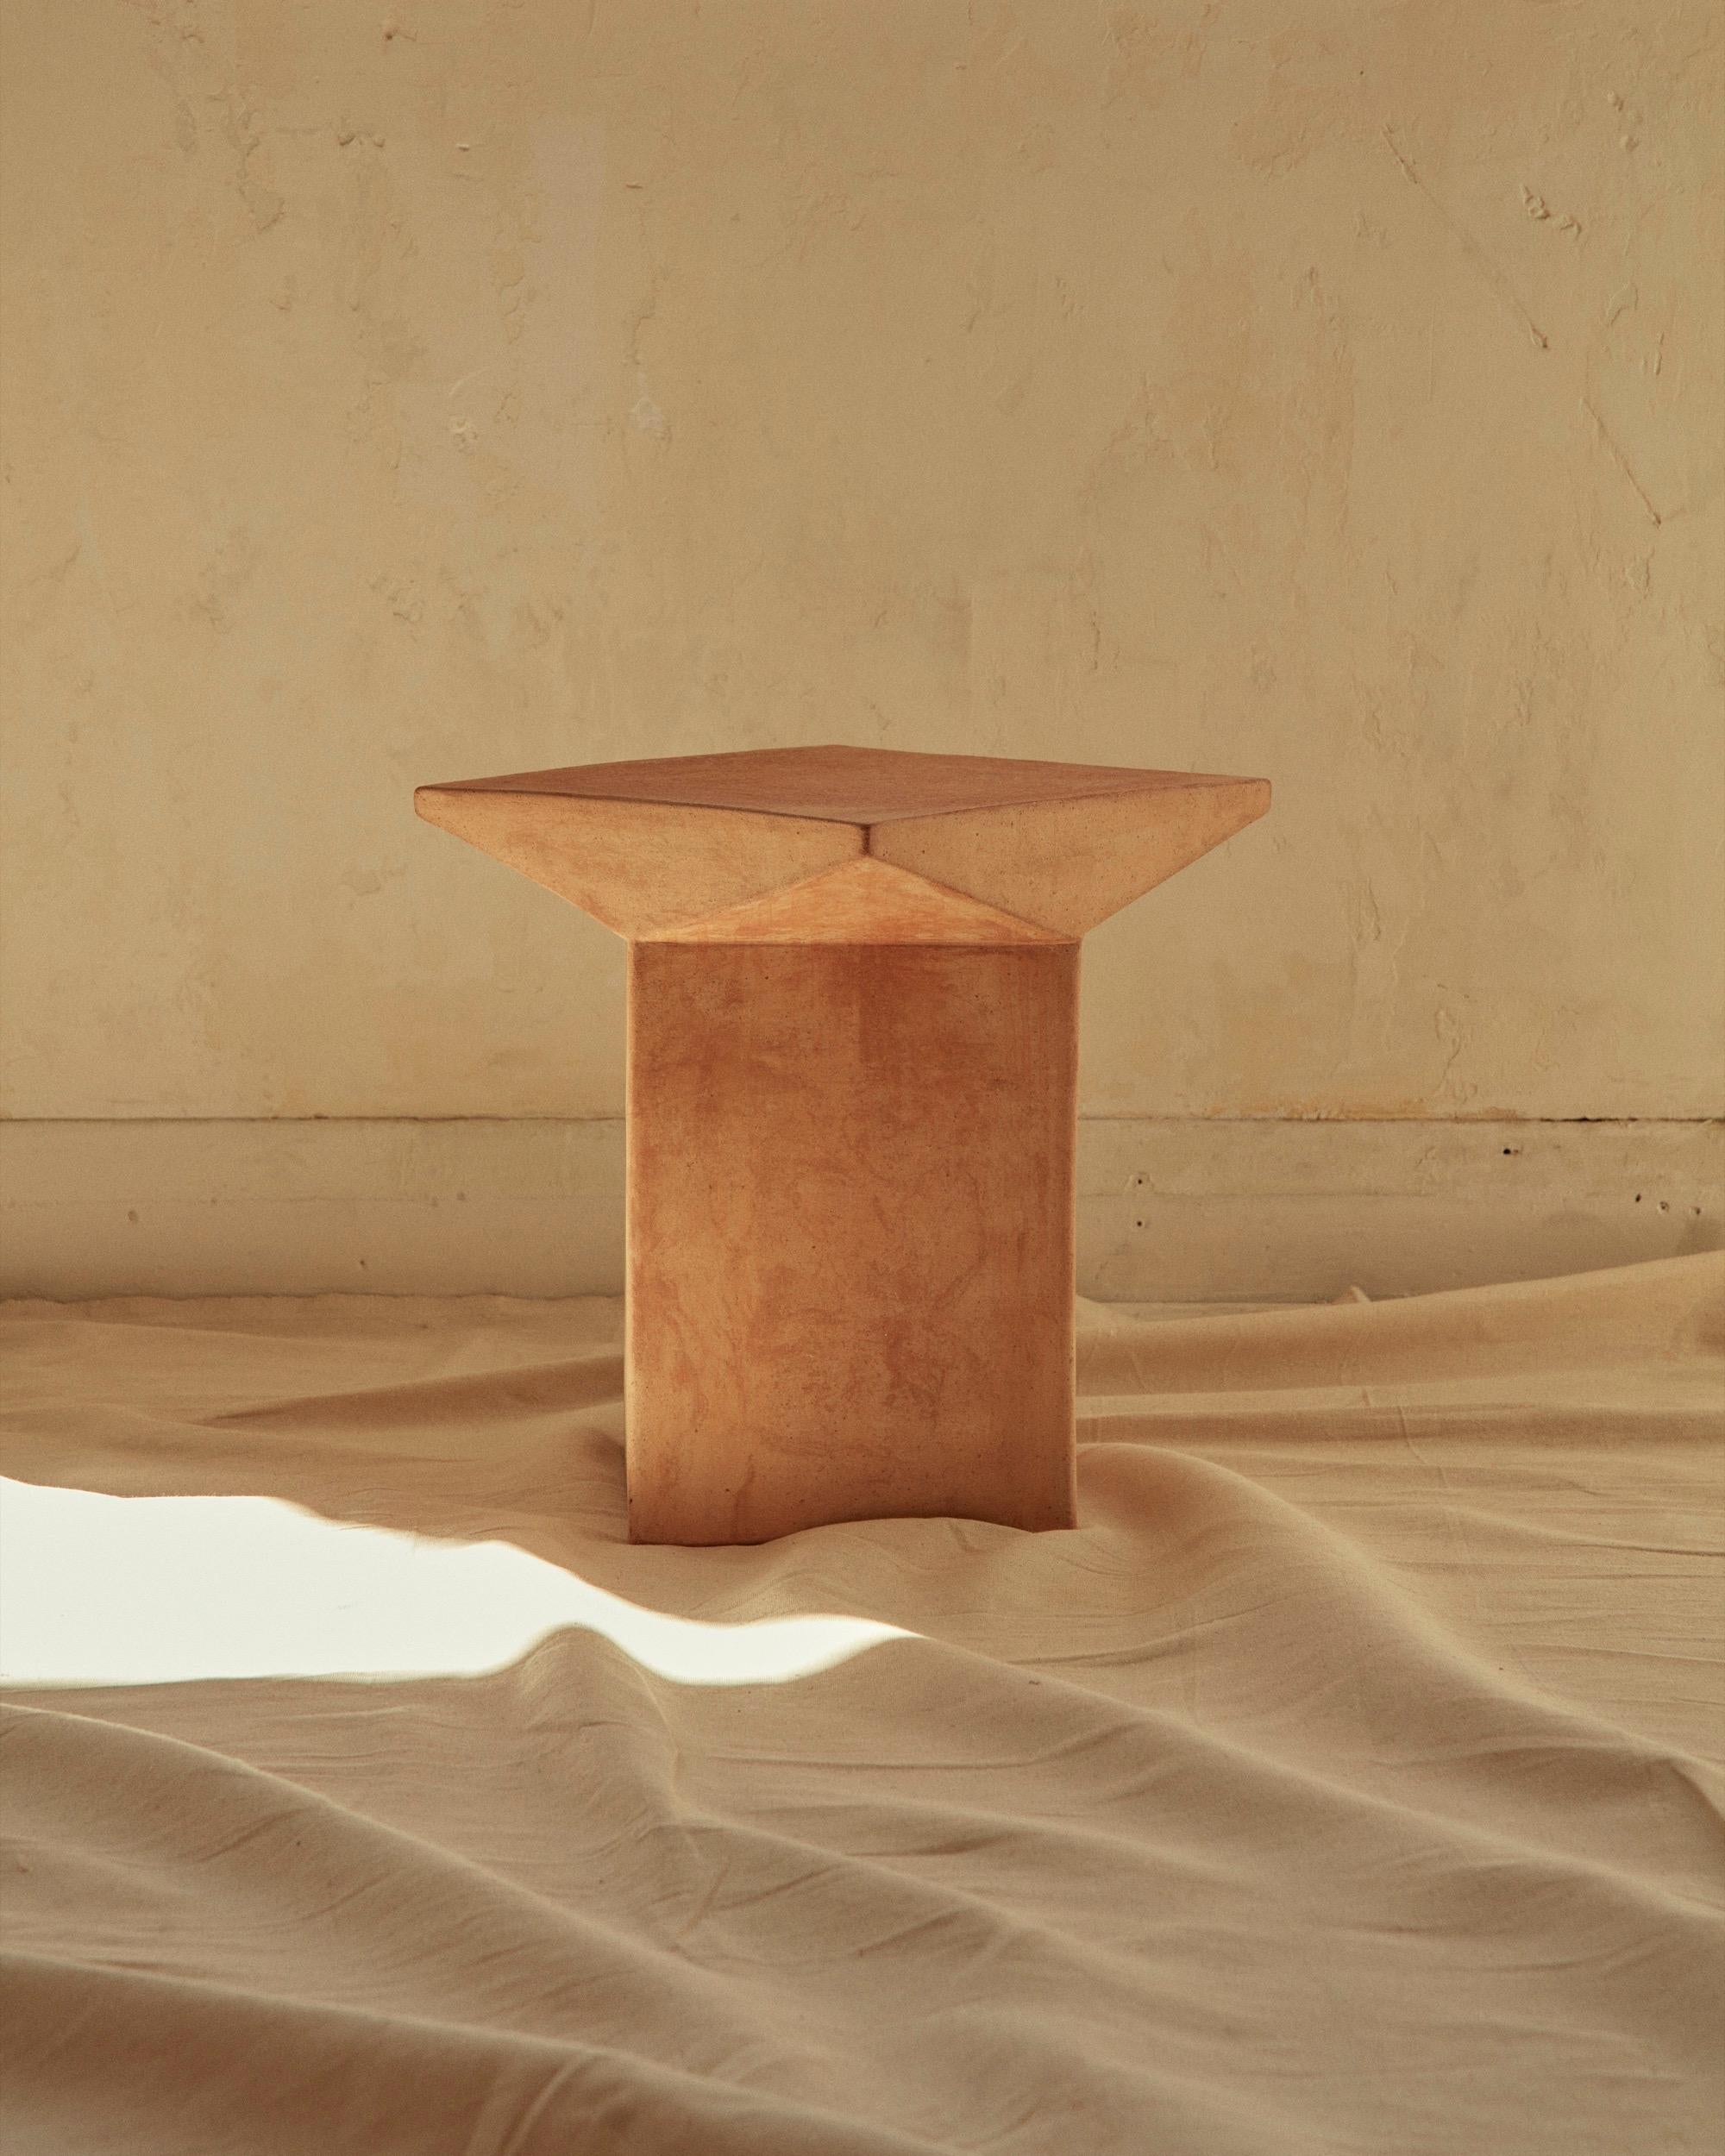 New volumes terracotta pitcher stool by Adam Goodrum.

Capturing the purity of geometry and mathematical balance, New Volumes Pitcher Stool designed by Adam Goodrum features an extruded square base with the top rotated 45 degrees, then married